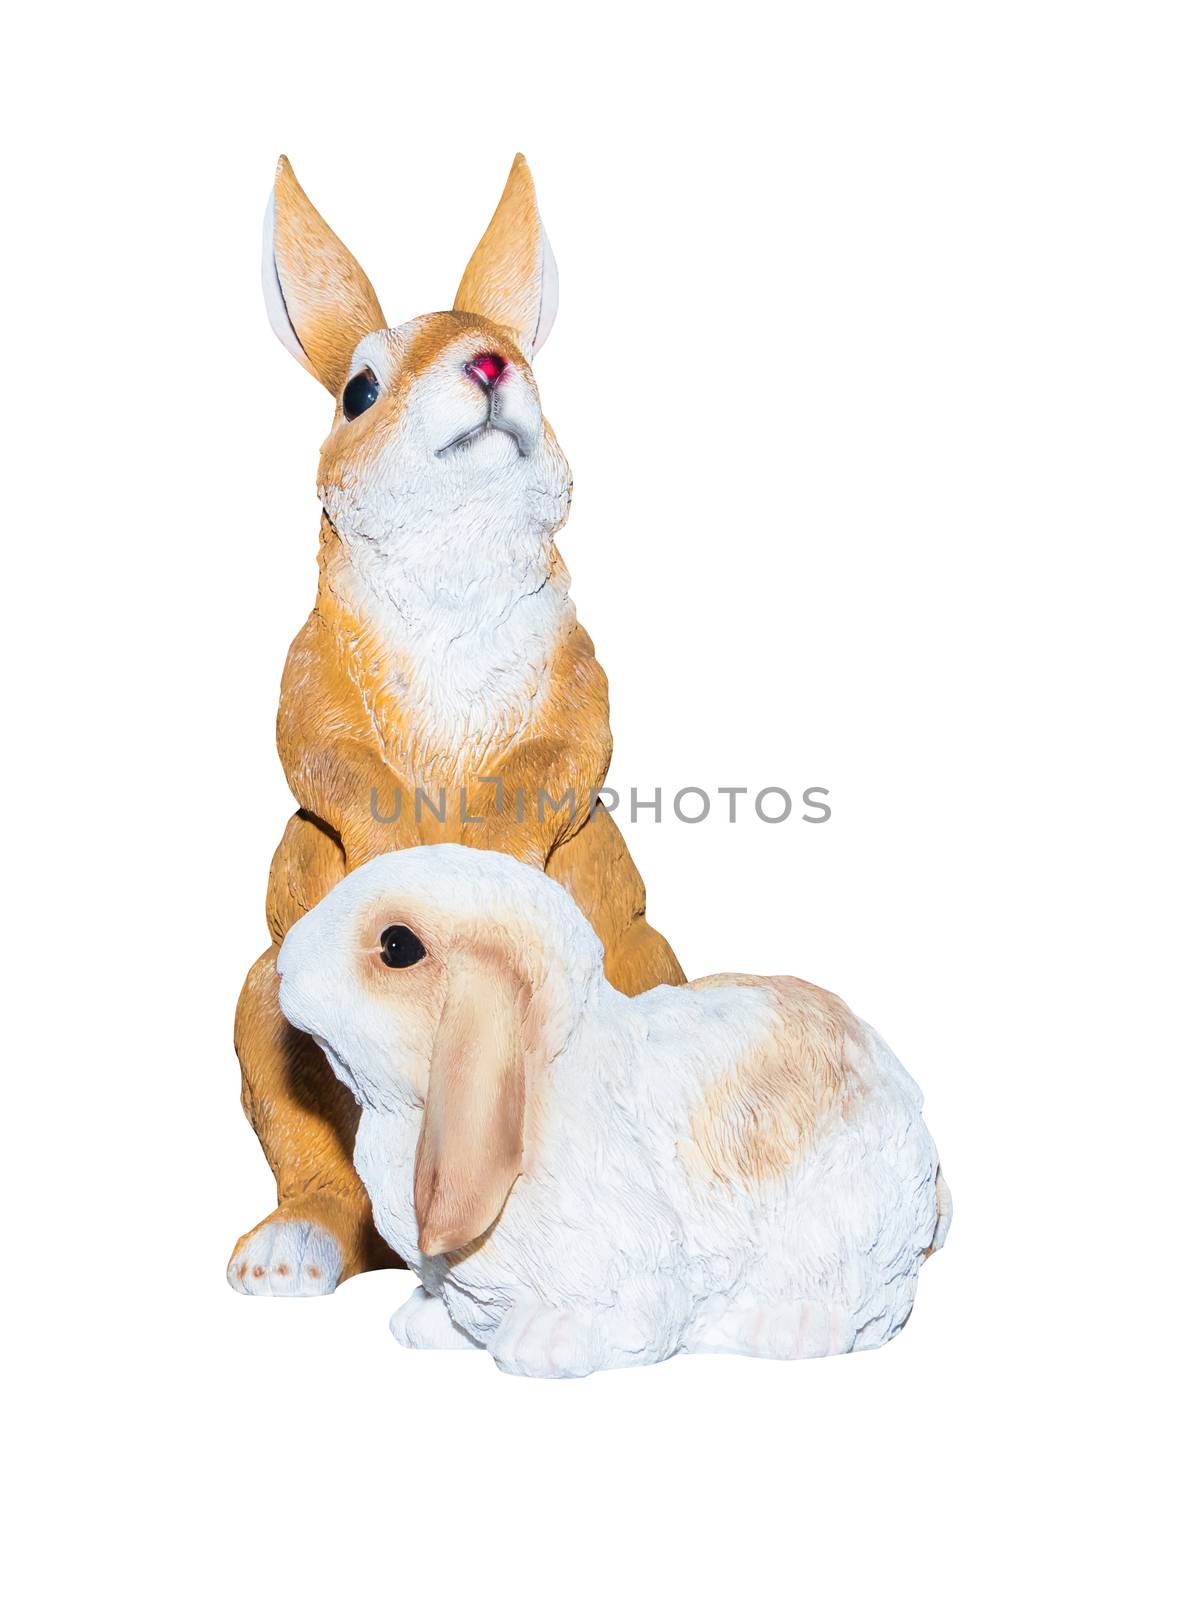 Two rabbits dolly toy is standing isolated on a white background by pramot